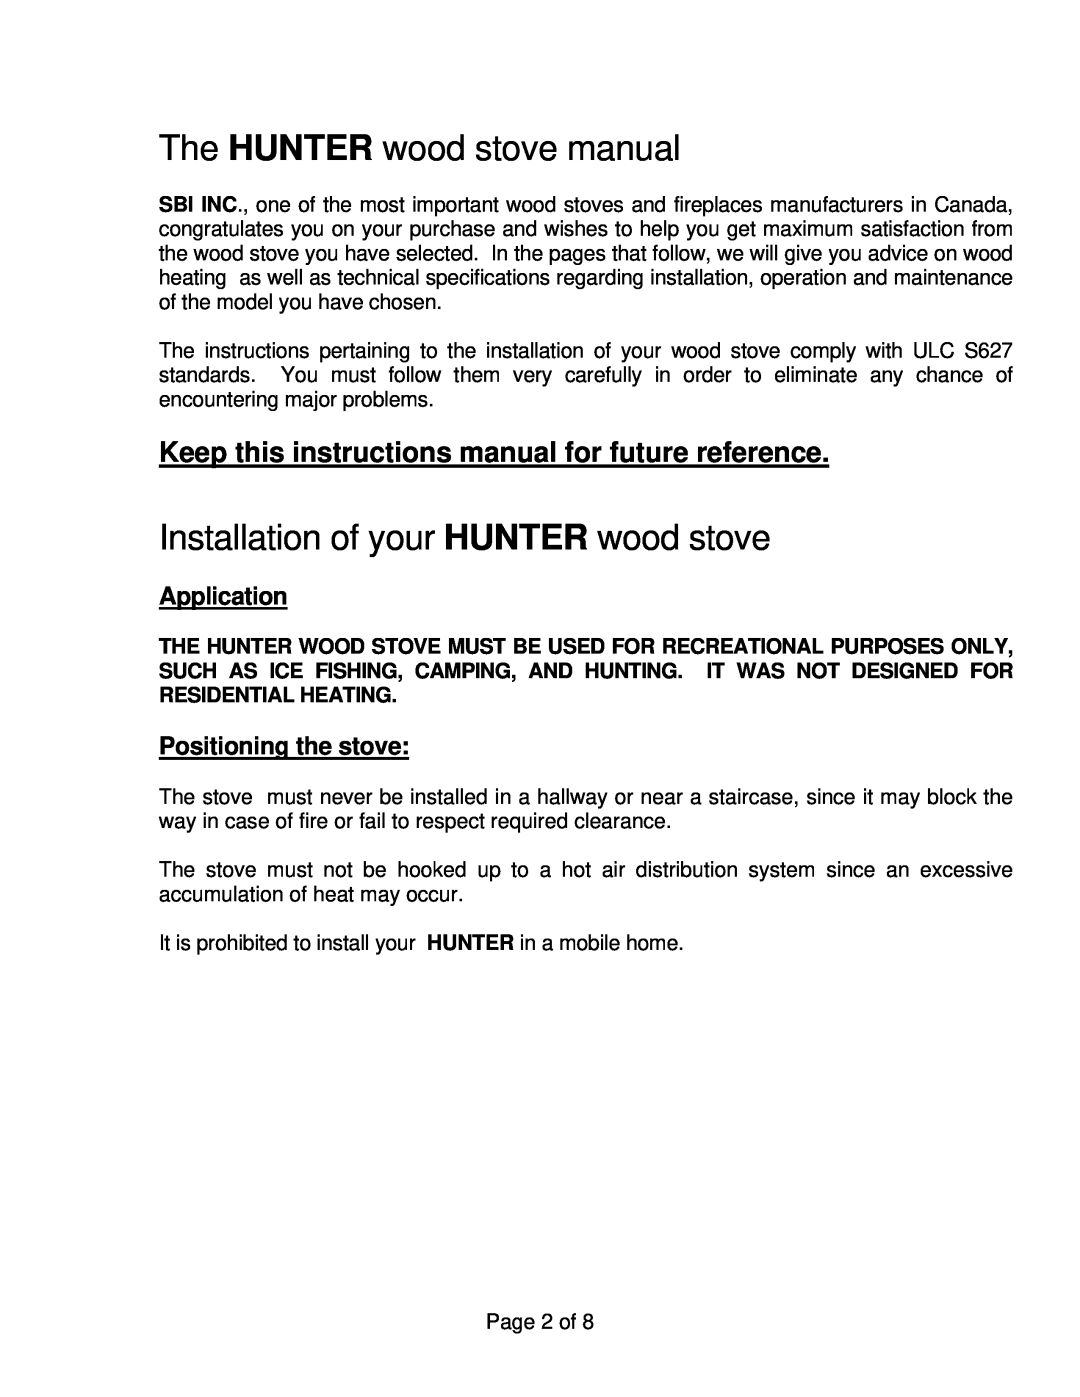 Drolet Hunter Wood Stove owner manual The HUNTER wood stove manual, Installation of your HUNTER wood stove, Application 